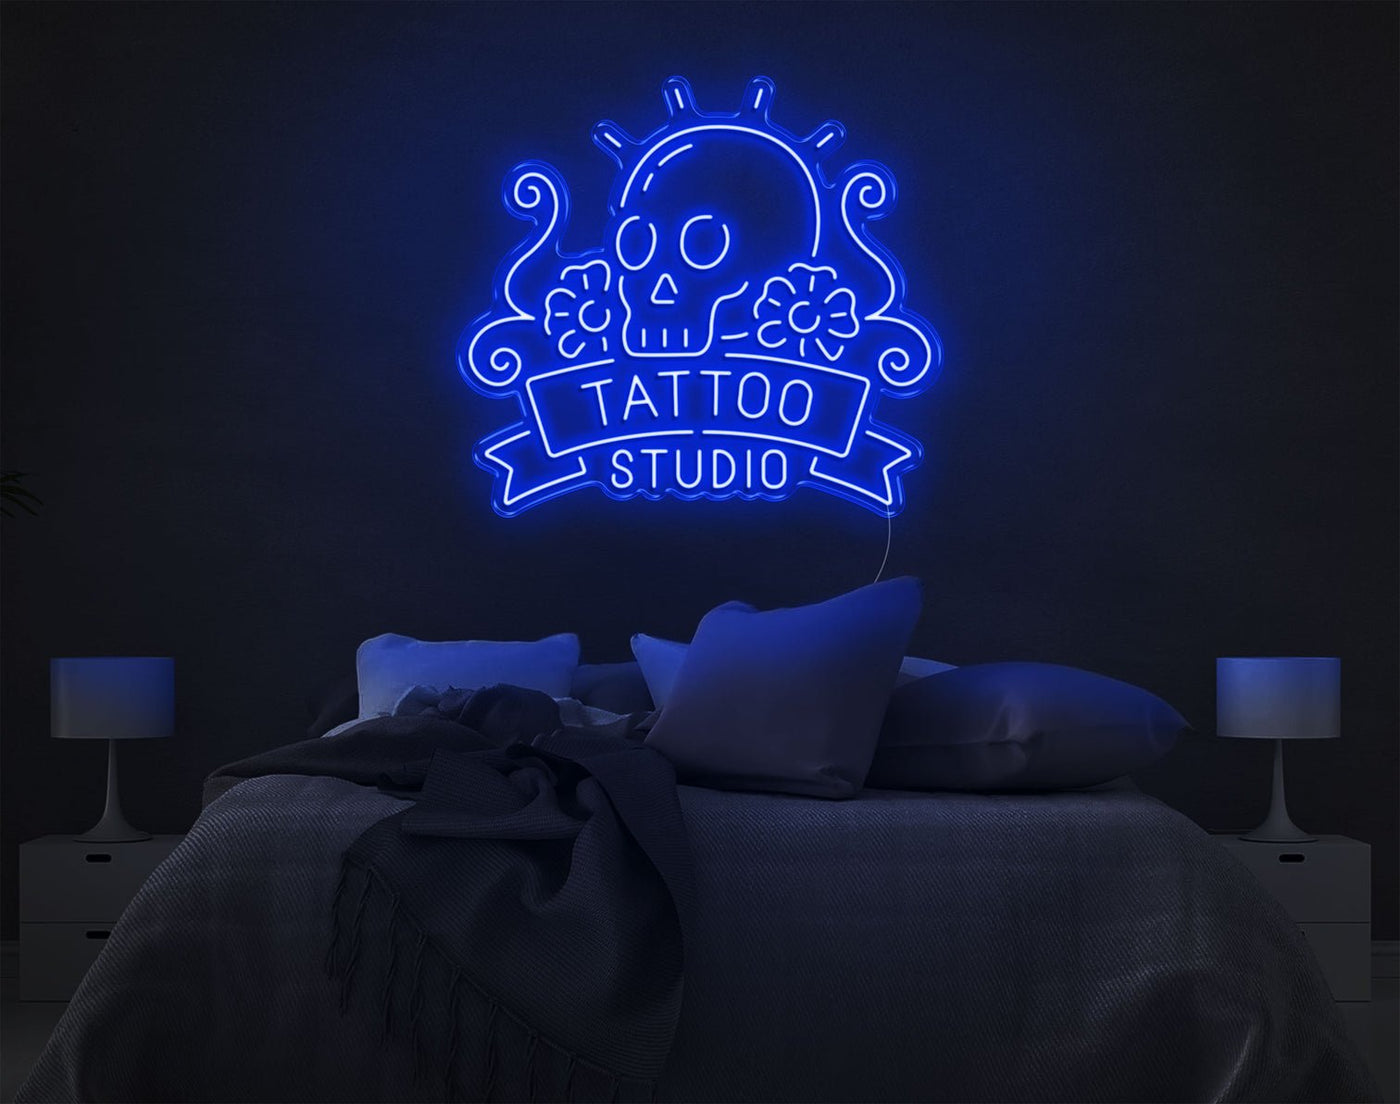 Tattoo Studio LED Neon Sign - 30inch x 33inchHot Pink